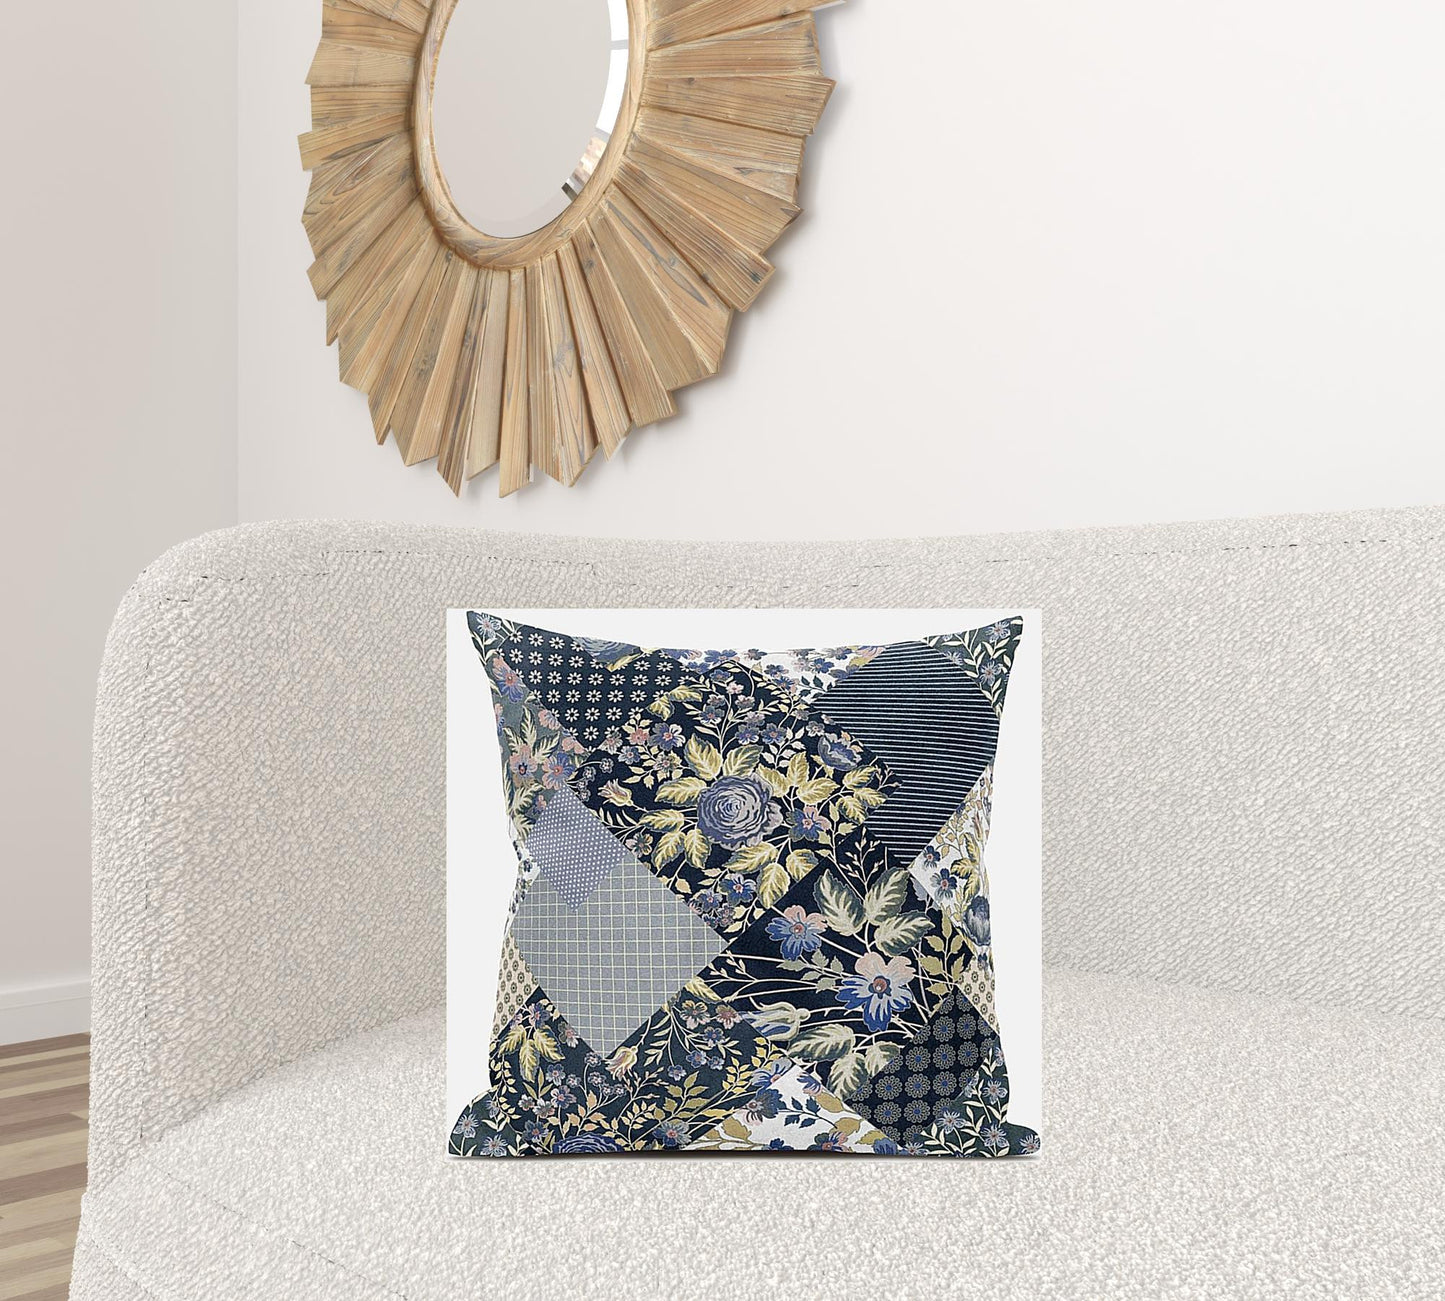 18" Black Yellow Floral Suede Throw Pillow